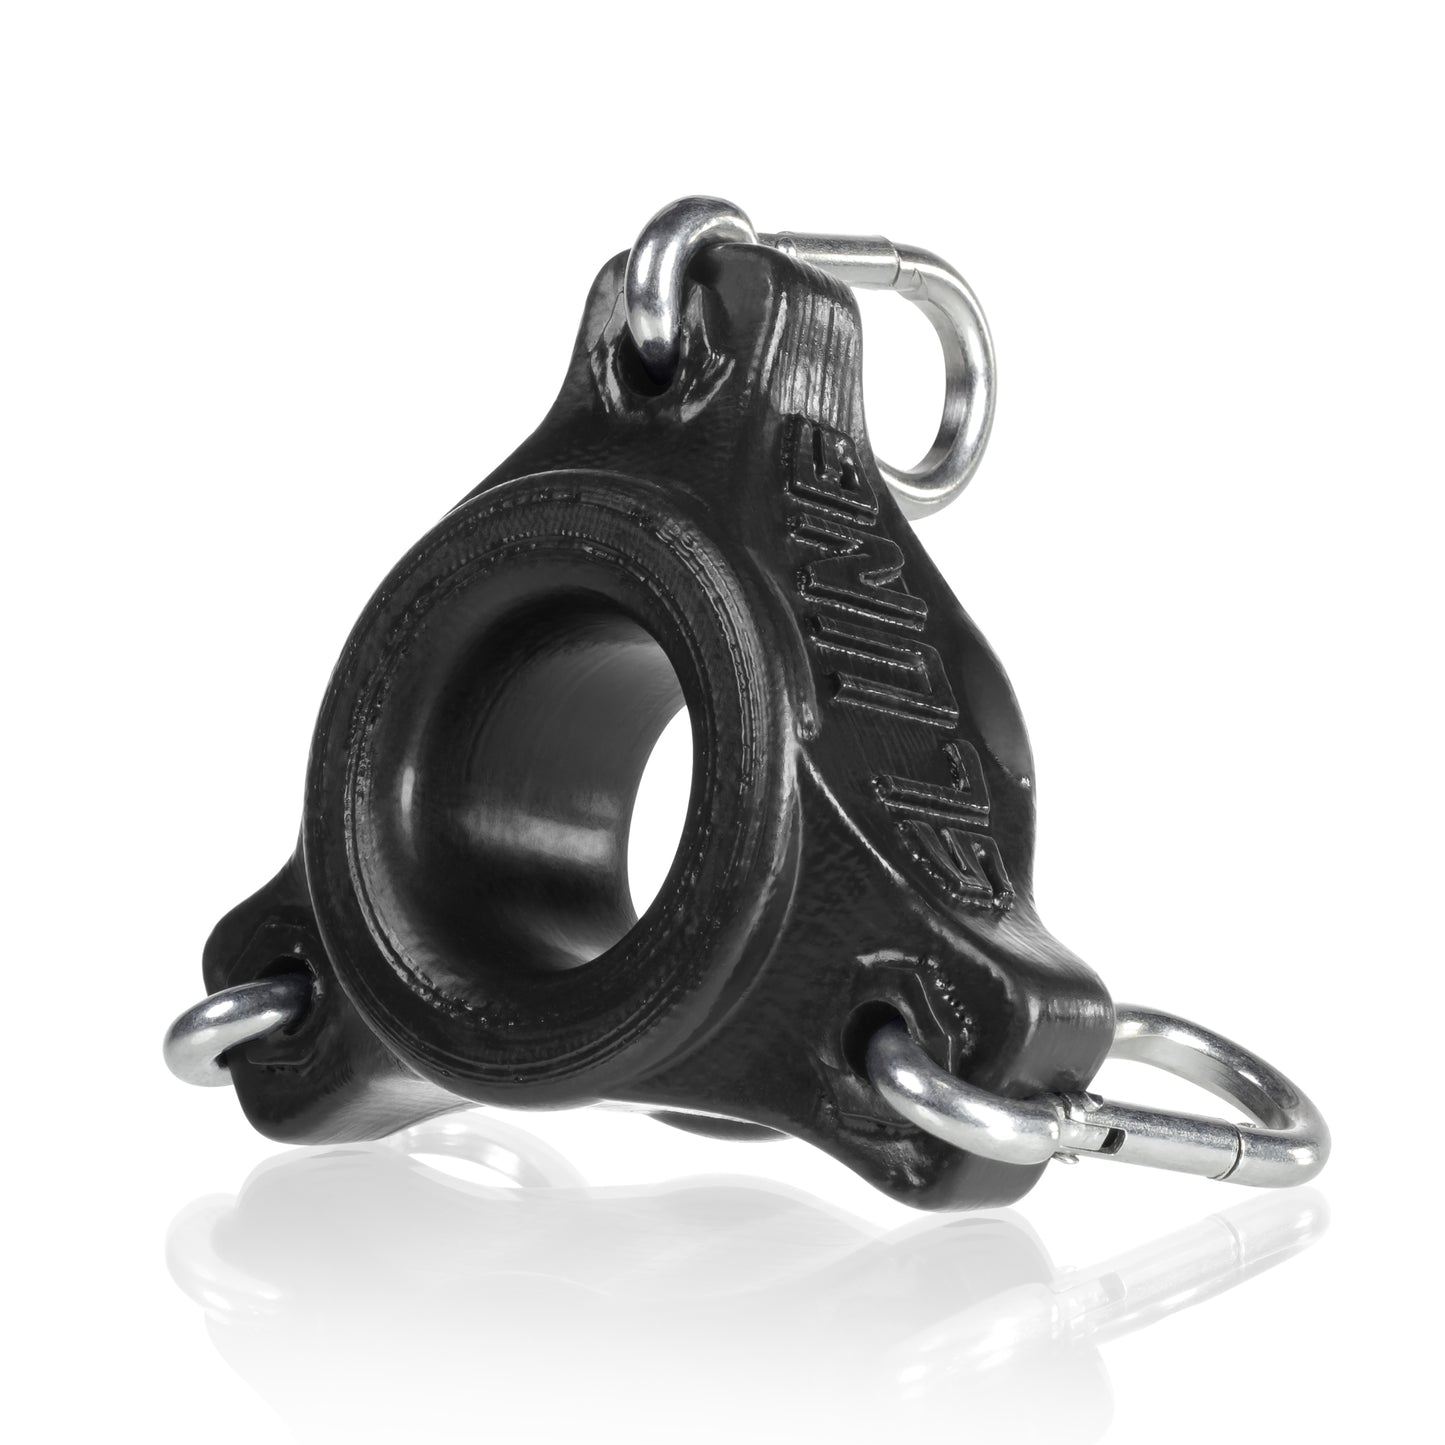 Slung Ballstretcher With 3 Carabiners Black - Just for you desires